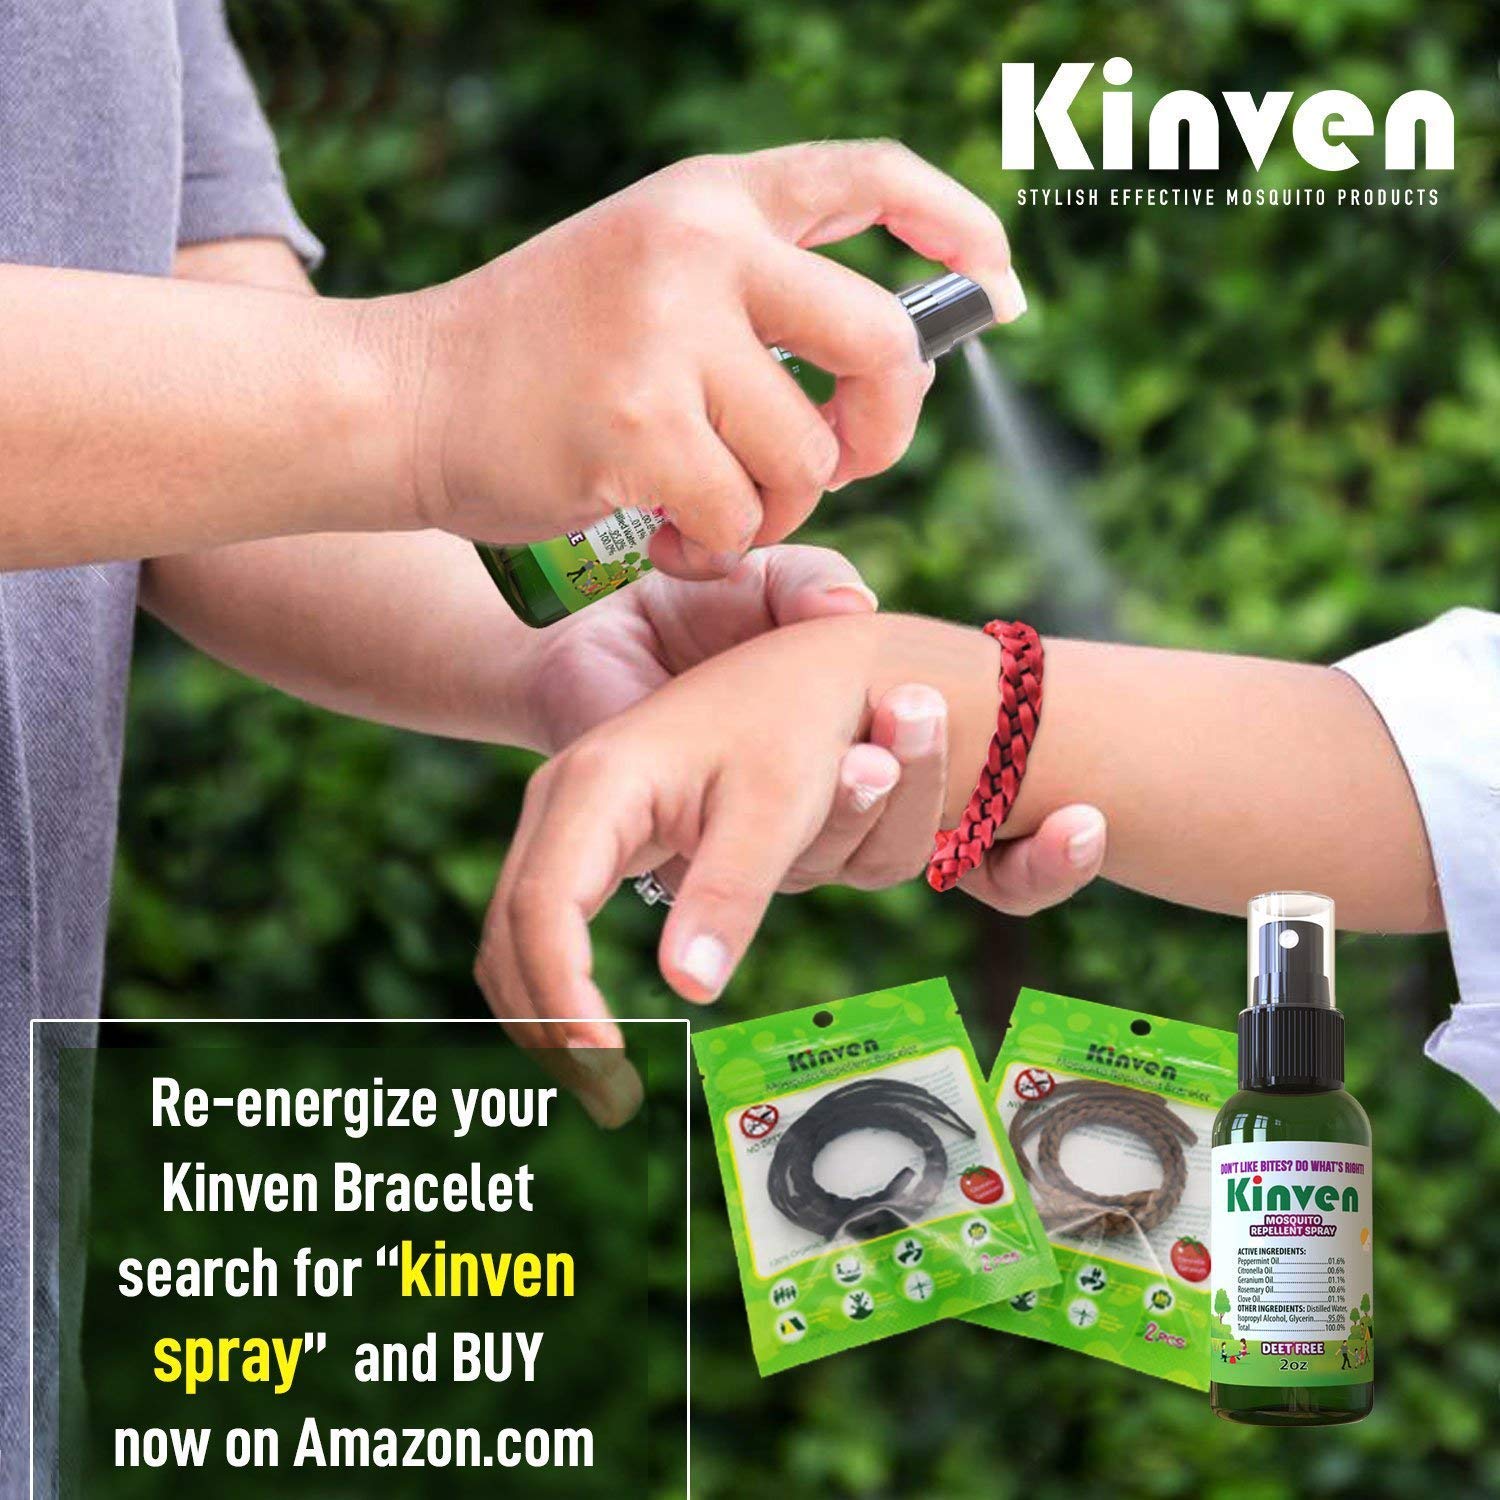 Kinven Mosquito Repellent Spray for Kids & Adults, Safe, Non-Toxic, DEET-Free, Long-Lasting Anti-Mosquito Bite Protection, with Natural Oils, 1oz - image 3 of 3